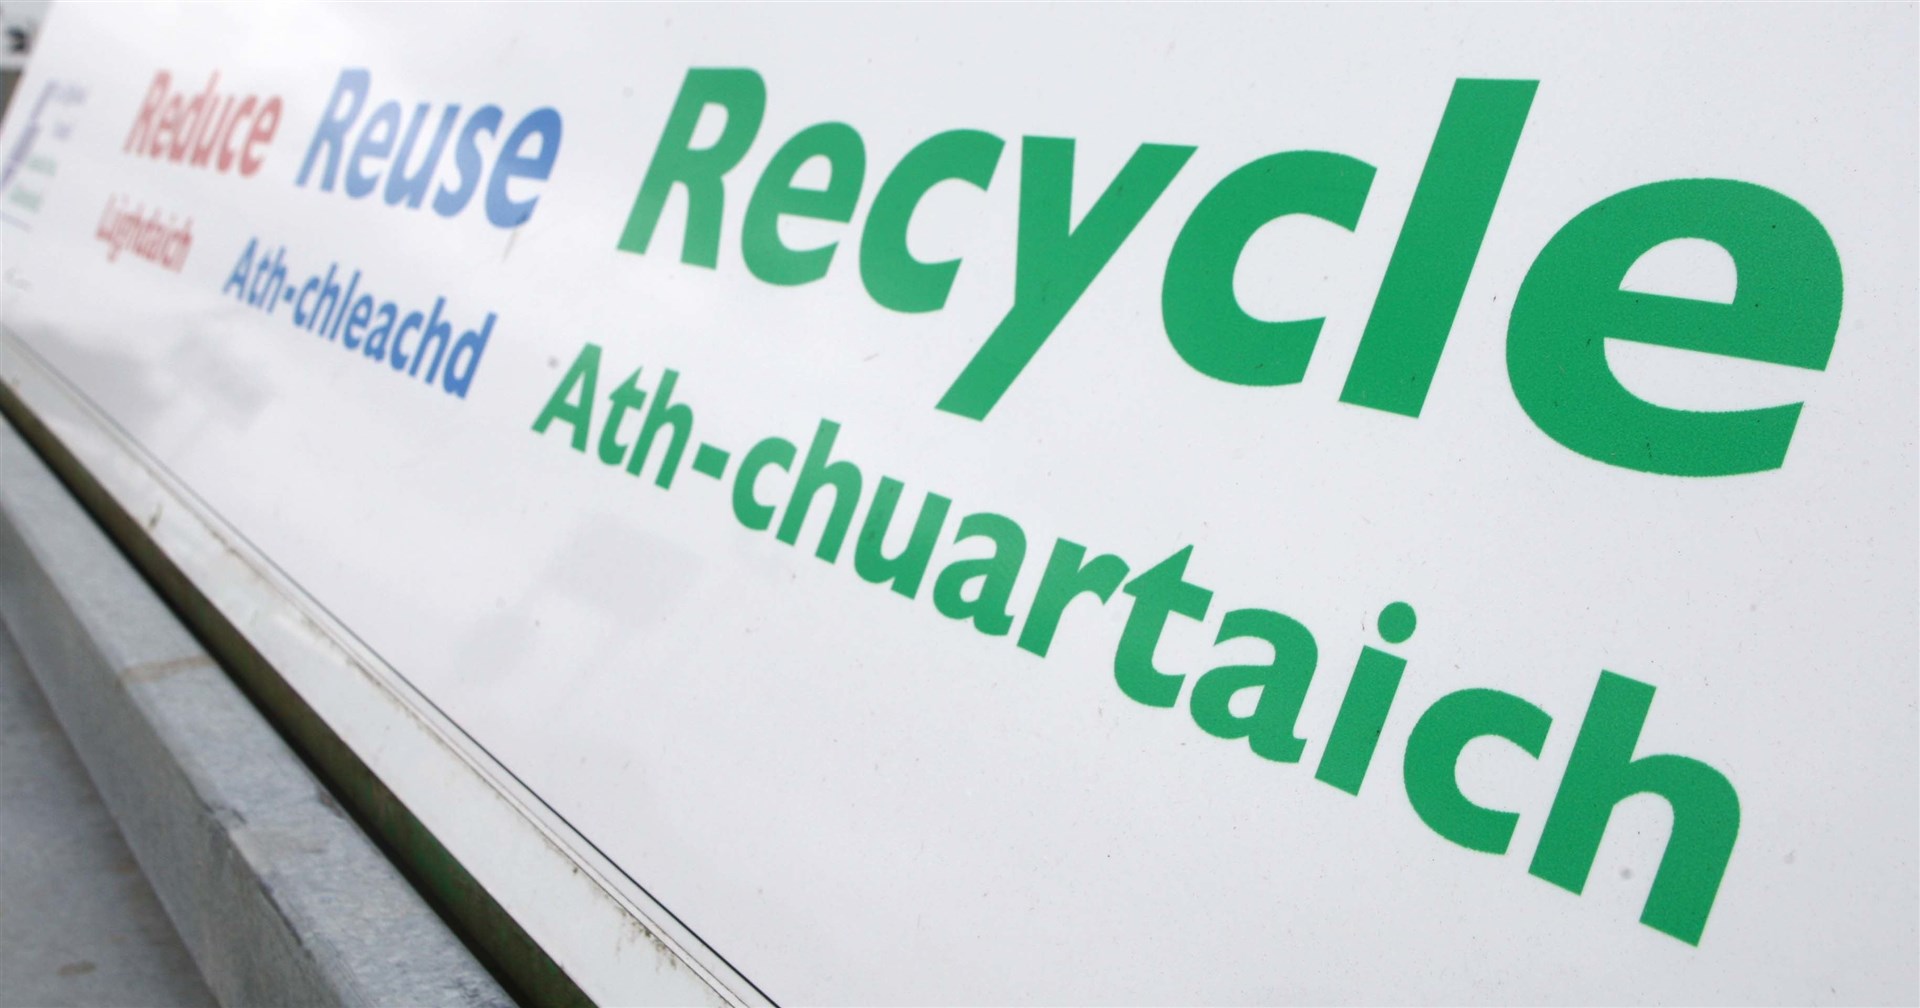 Highlanders have been thanked for maintaining a commitment to recycling and Highland Council crews for maintaining a service in challenging times.